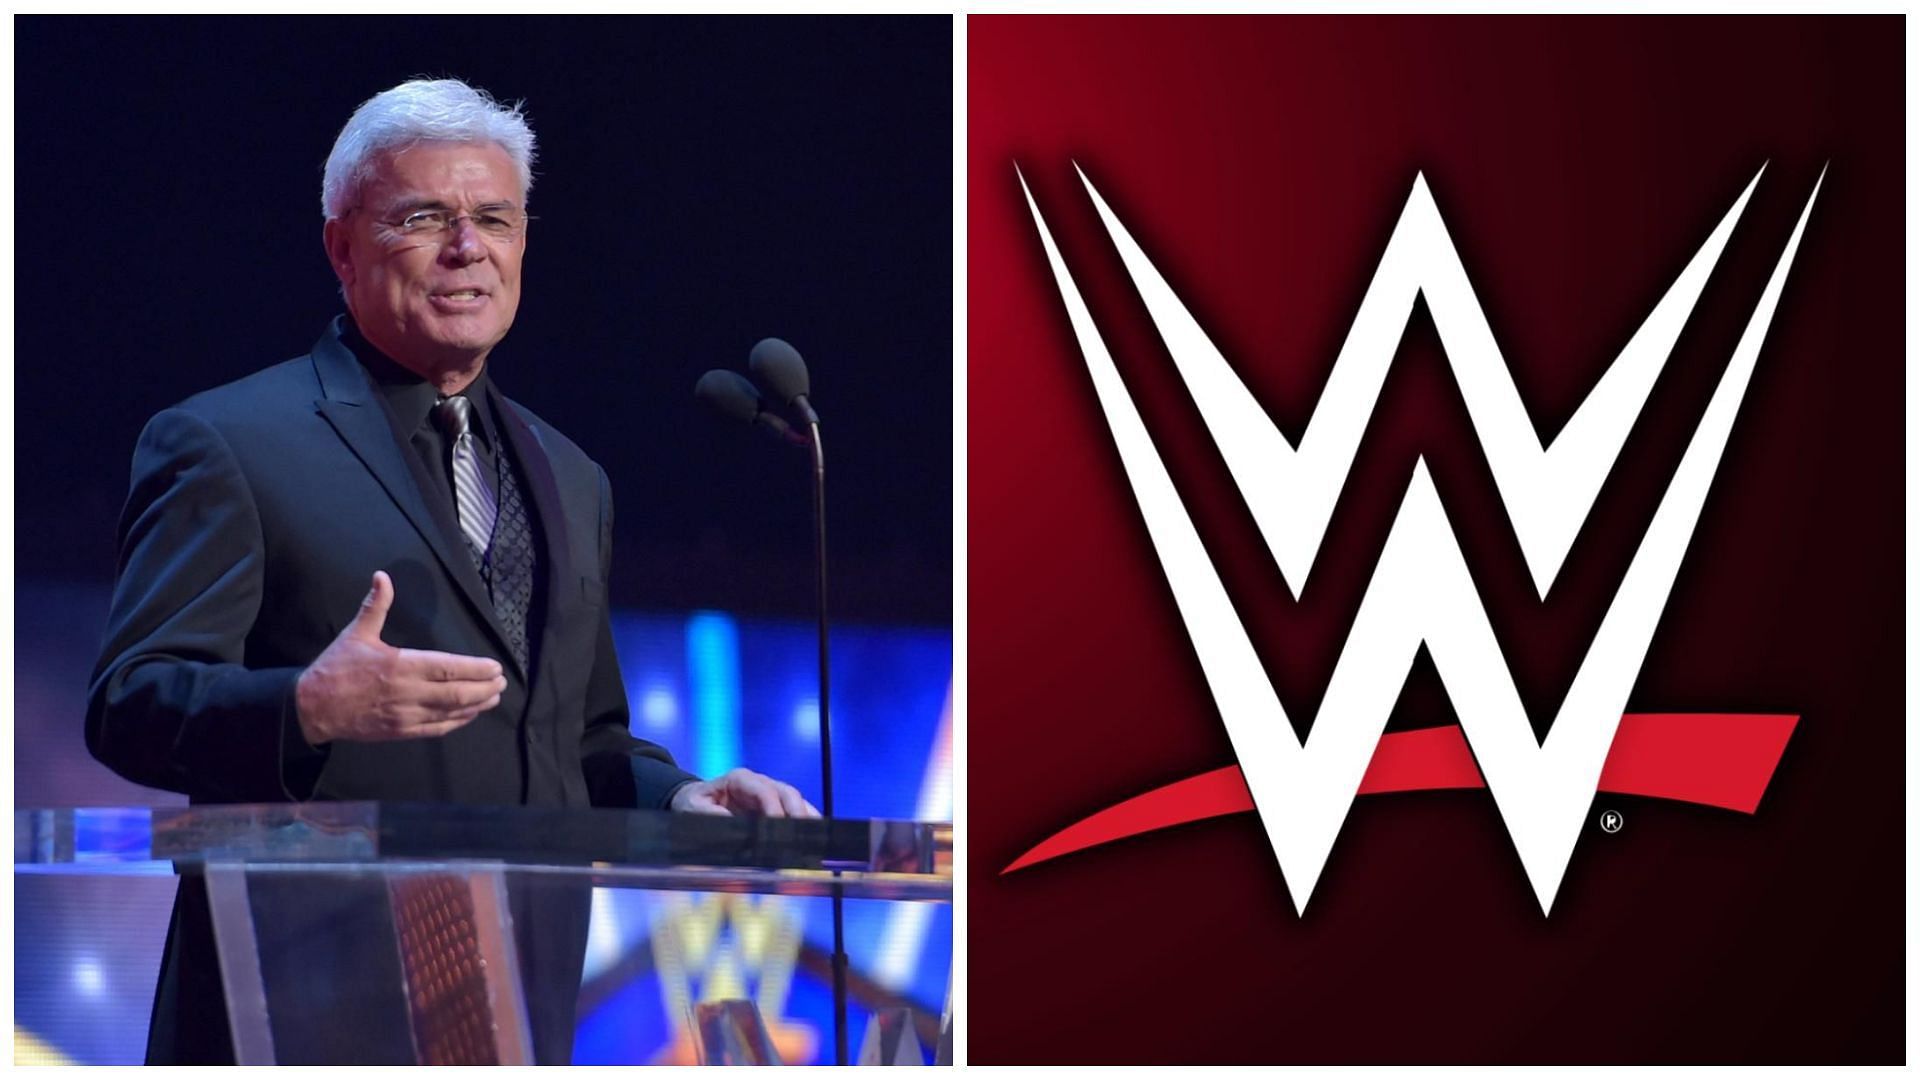 Eric Bischoff is a WWE Hall of Famer.